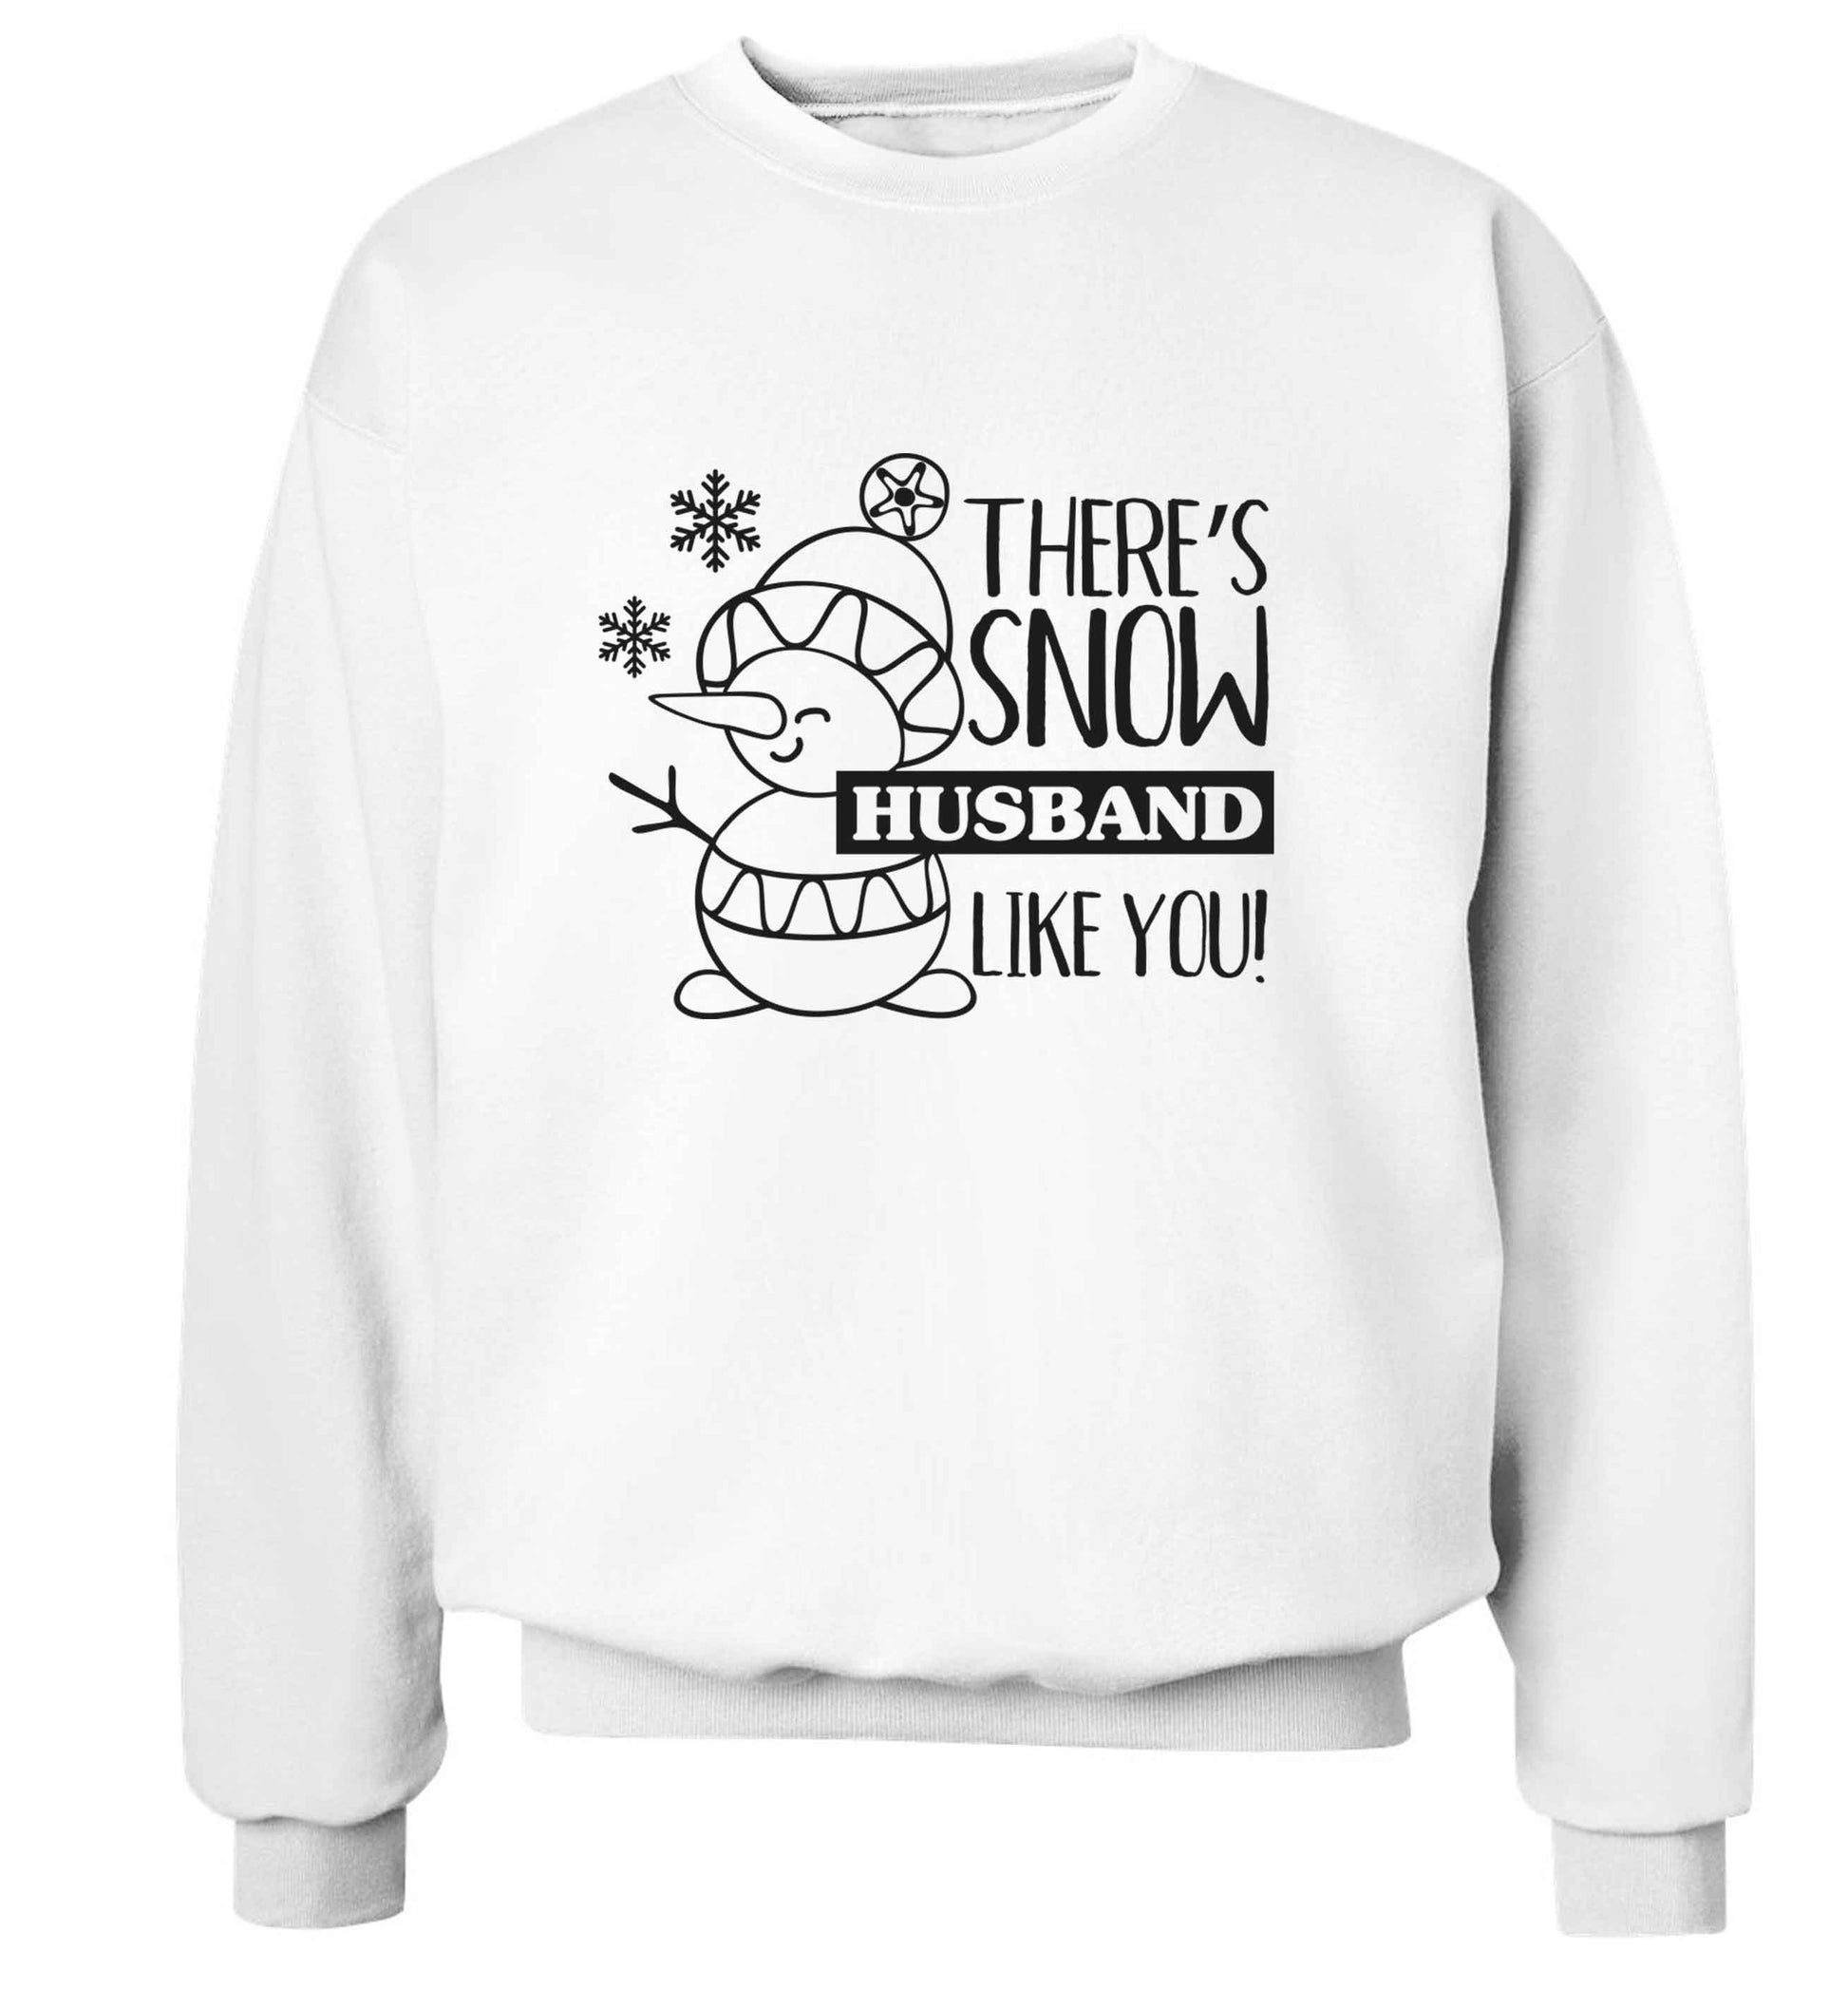 There's snow husband like you adult's unisex white sweater 2XL